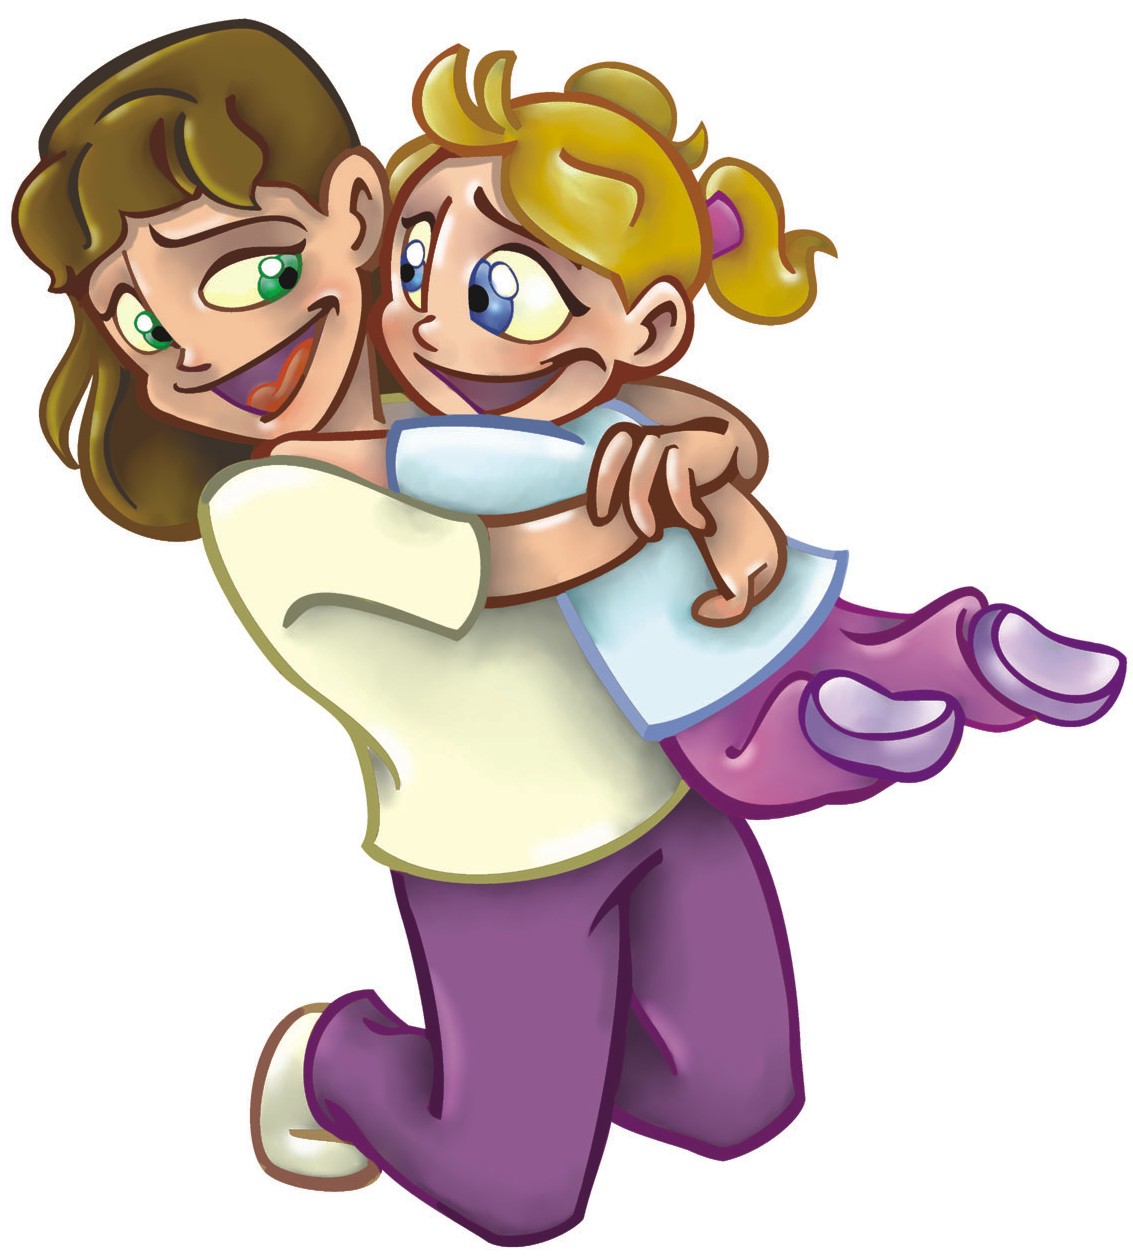 Couple Hug Animated Clipart - Cliparts and Others Art Inspiration